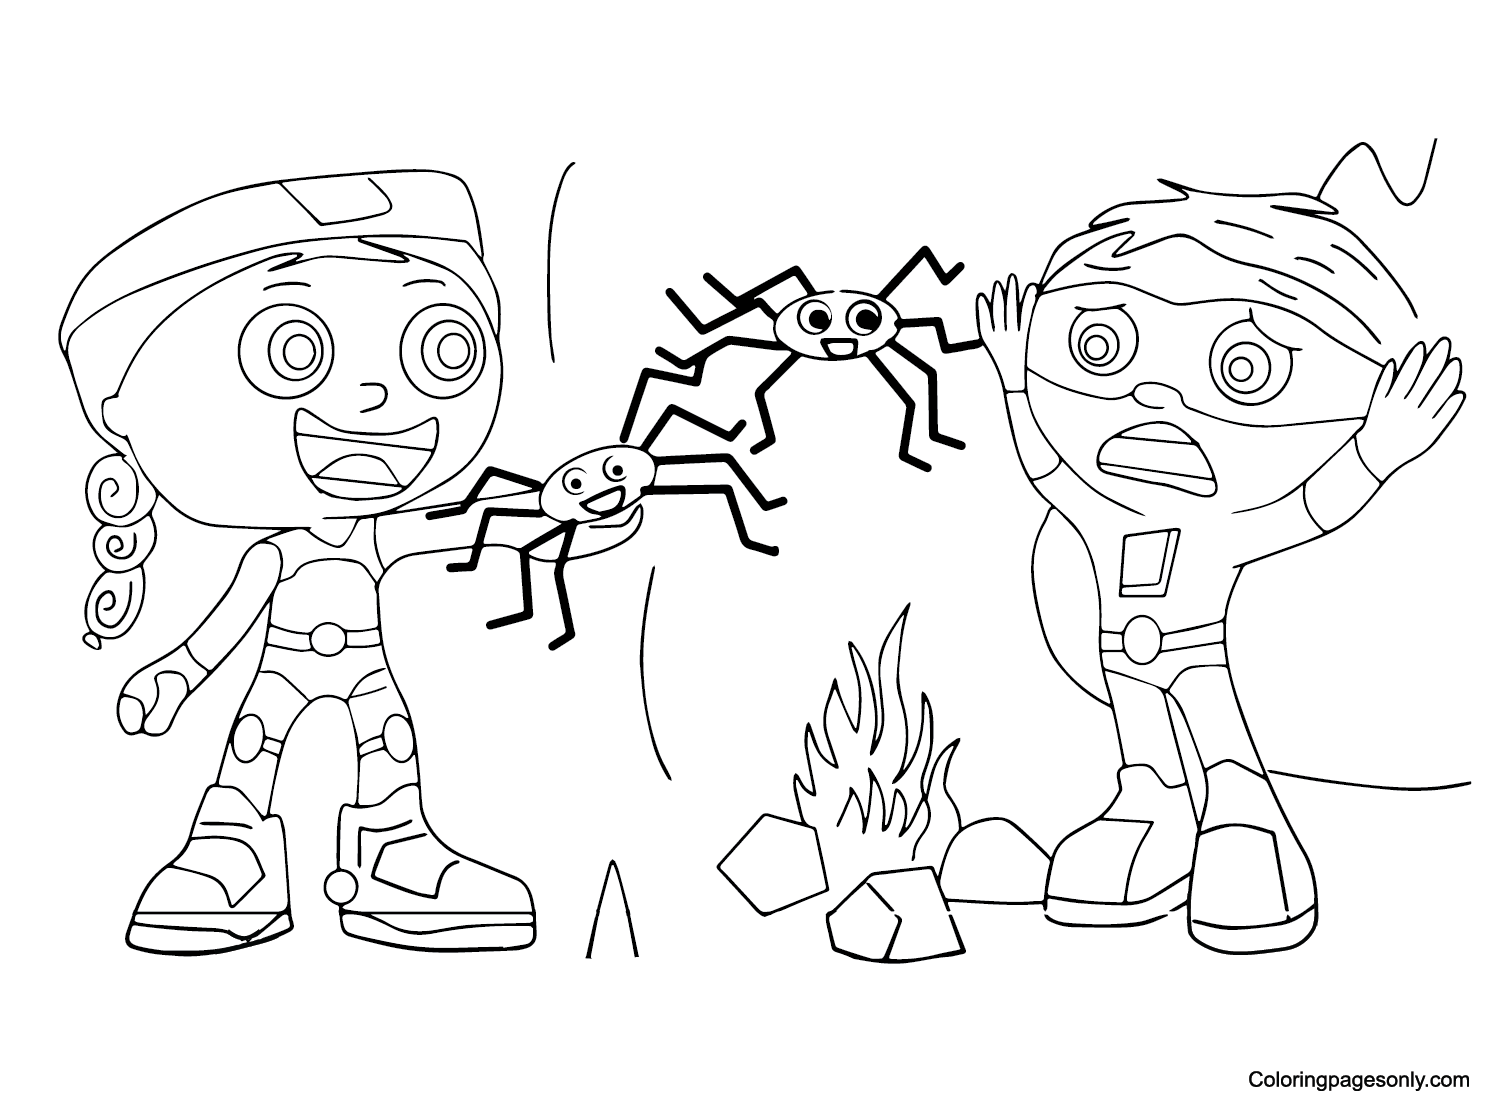 Super Why with Wonder Red Coloring Page